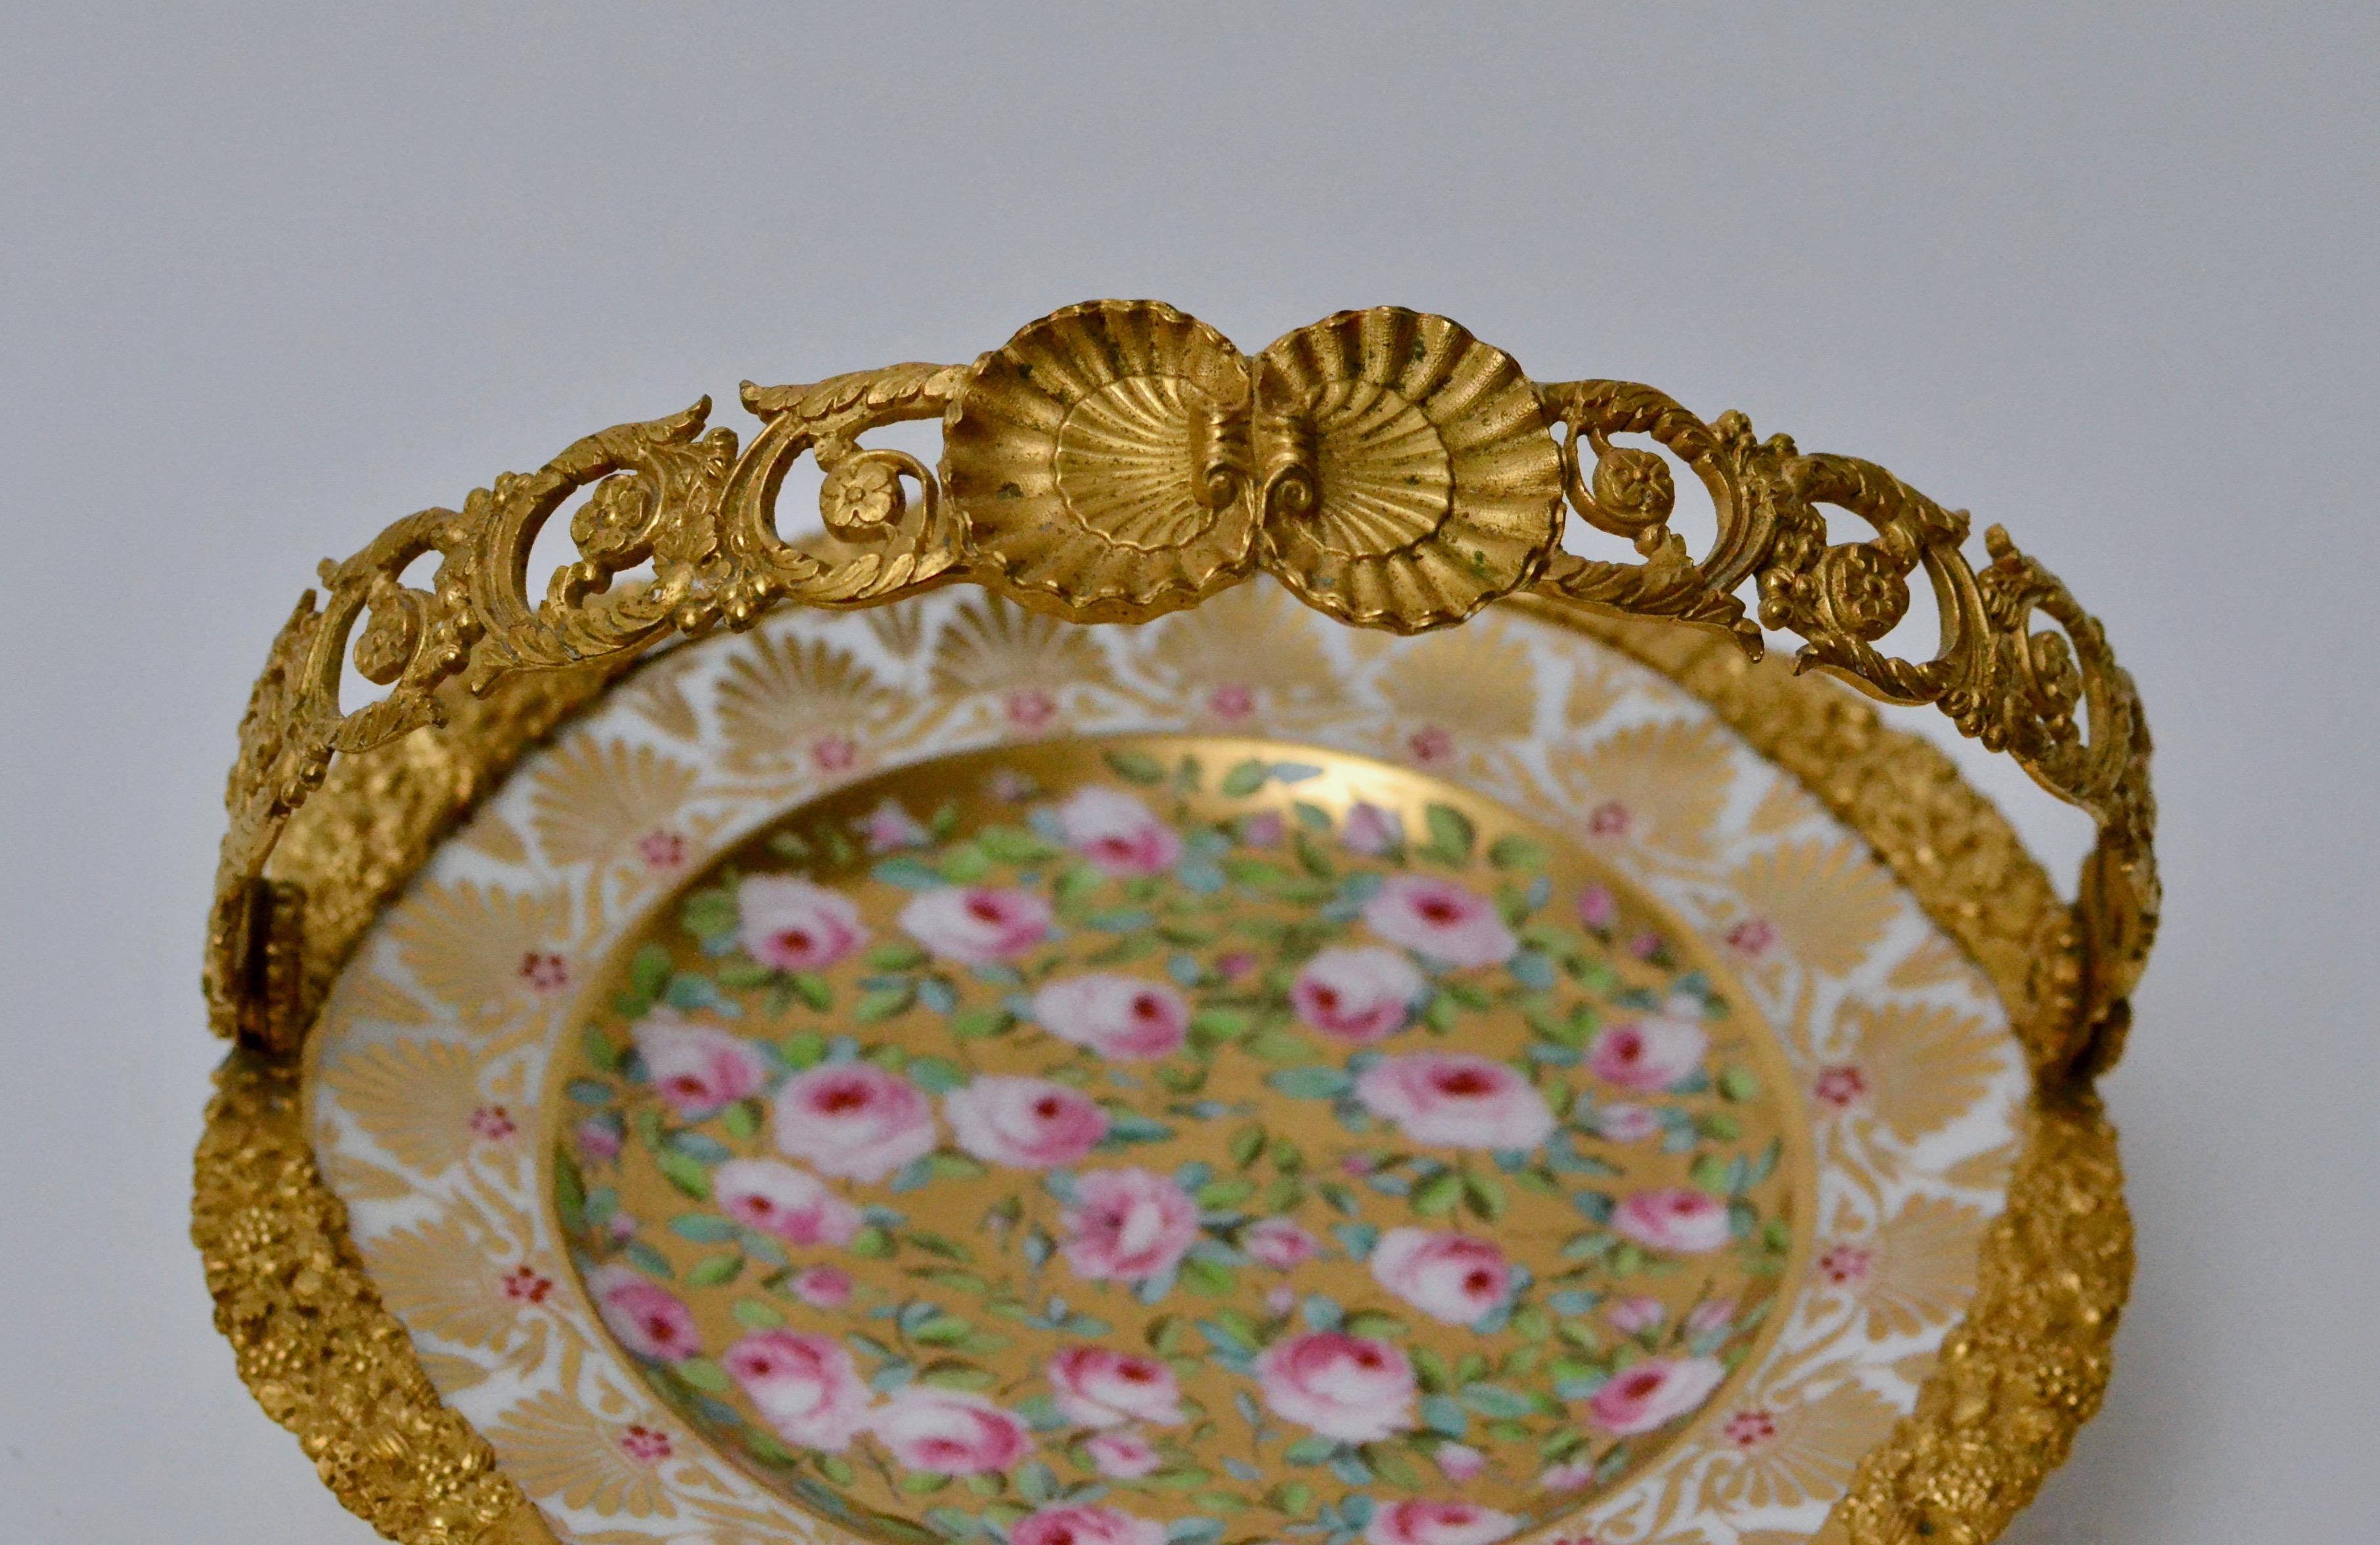 Cake stand ormolu-mounted painted porcelain plate with a gilt bronze handle. First half of the 19th century. The porcelain finely painted with roses and gilt.